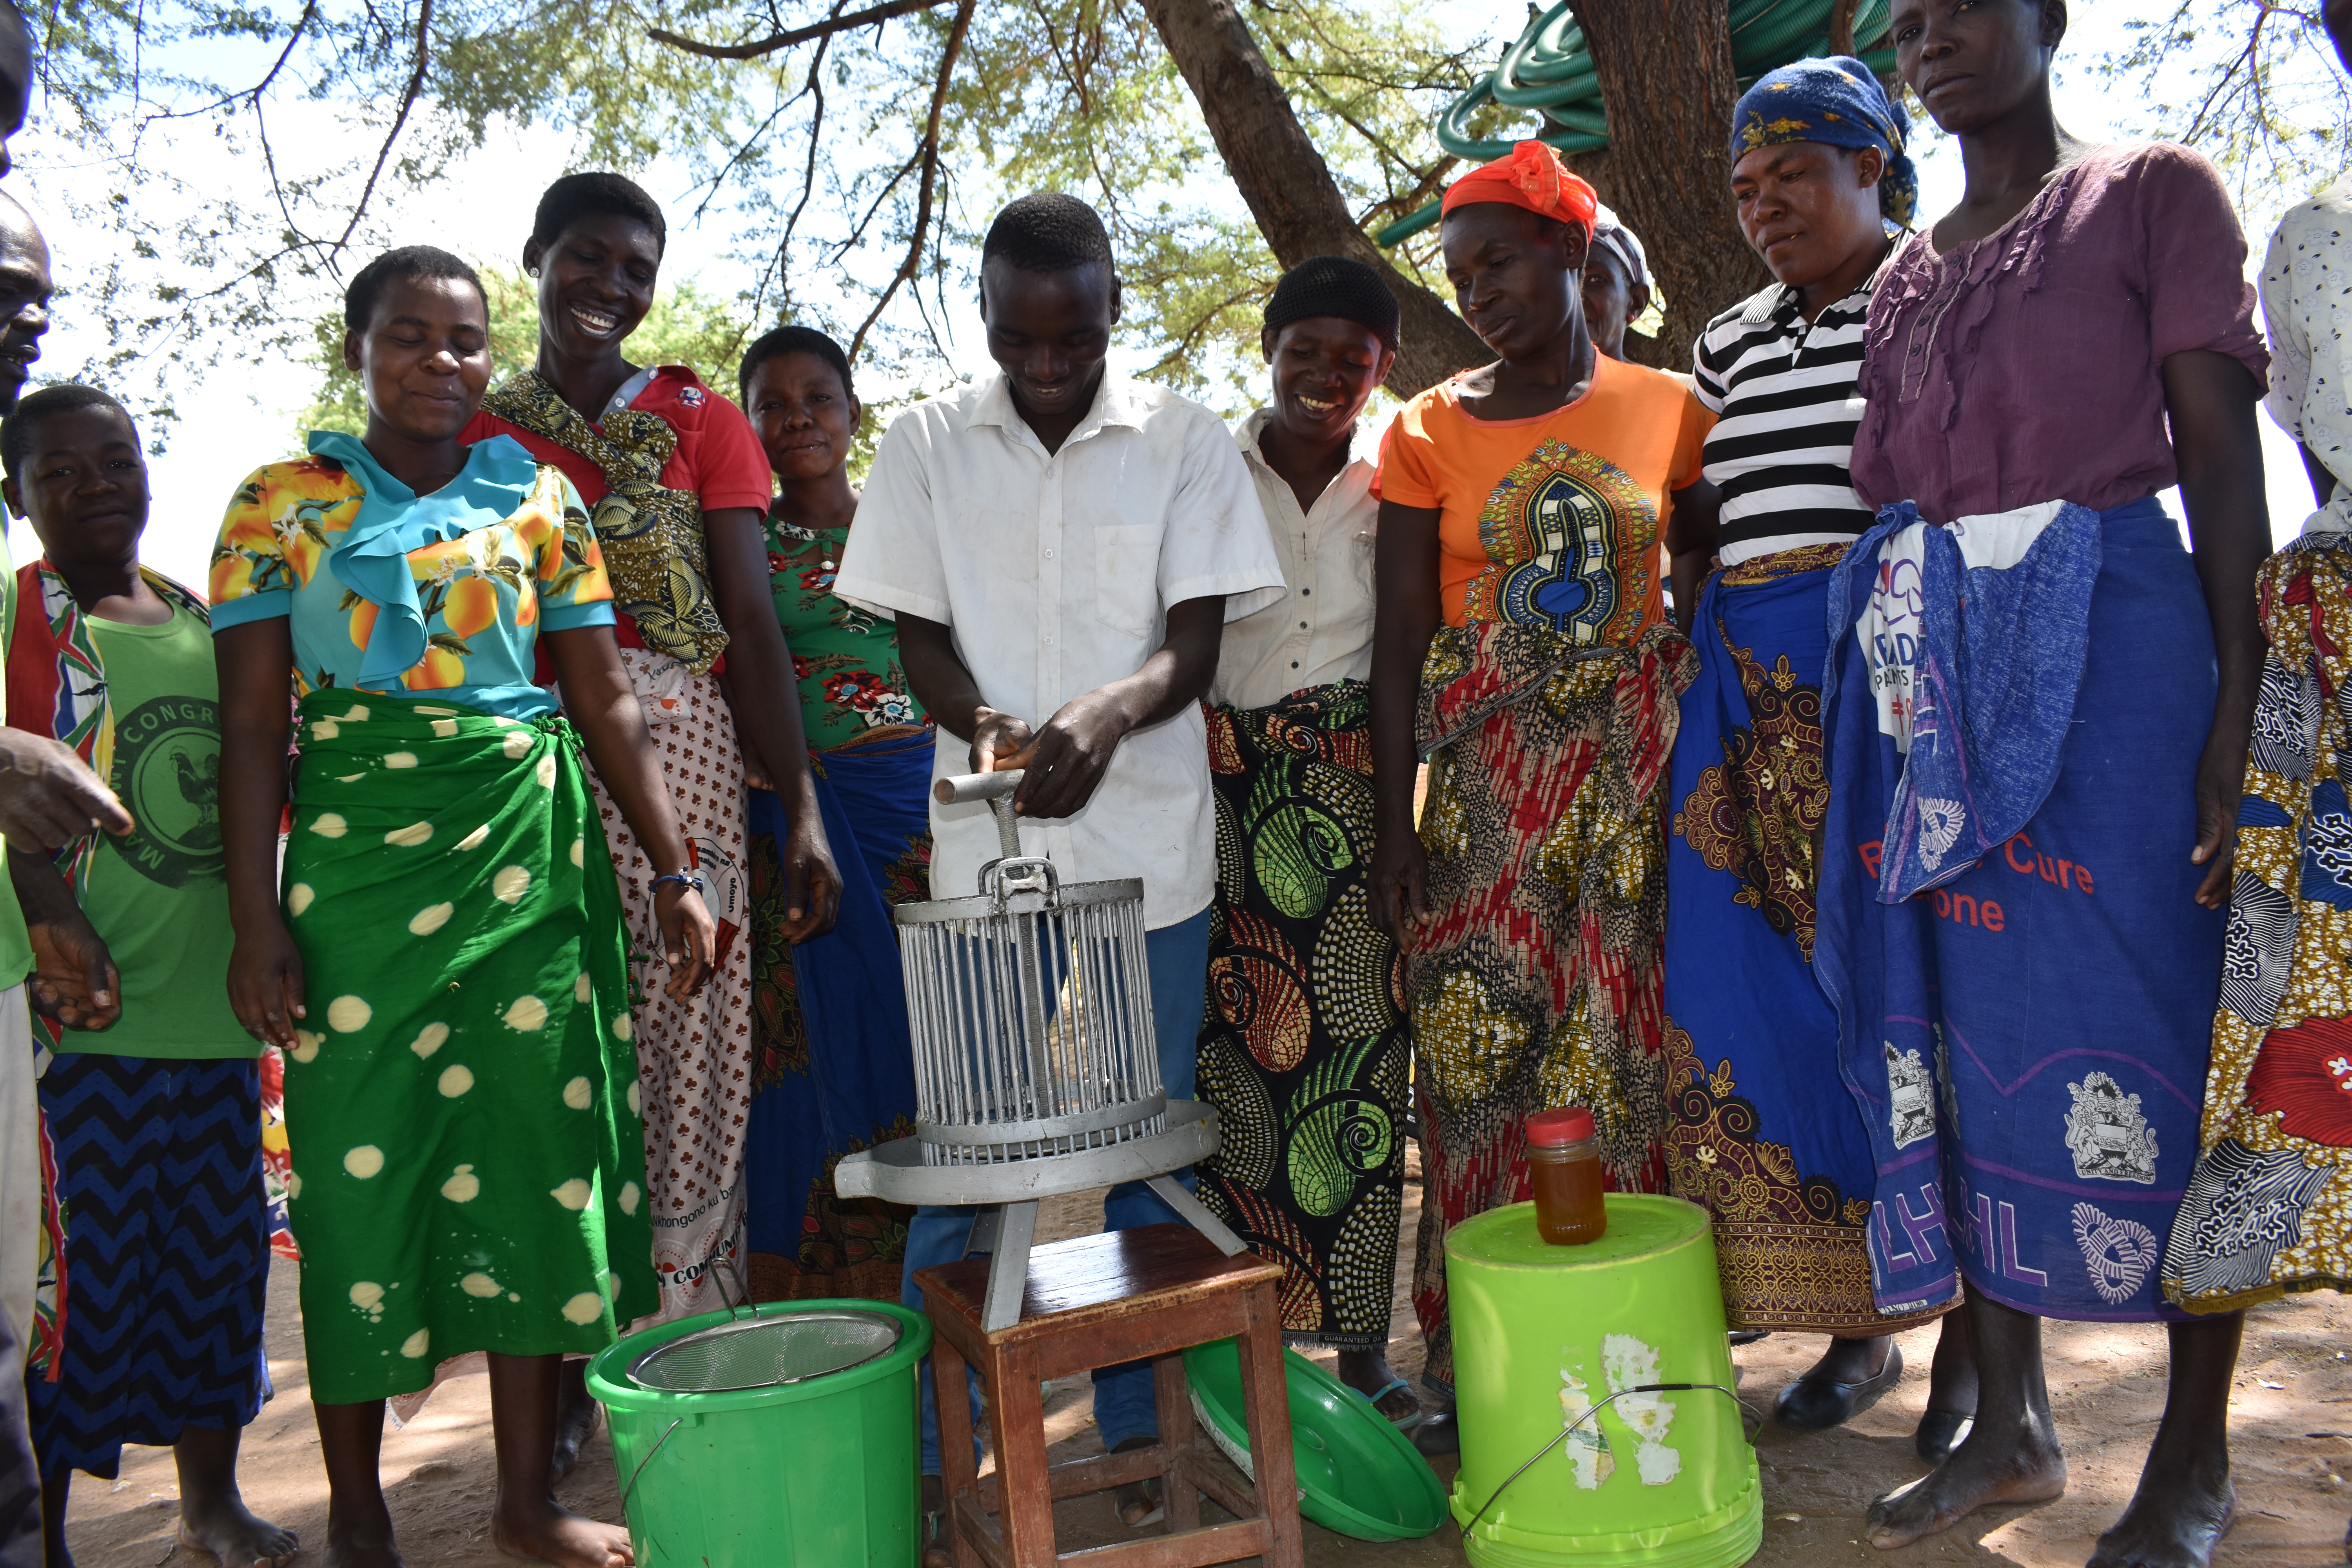 With 10 new beehives, the Dikeni Club yielded 20 litres of honey worth 57 000 Malawi Kwacha (approximately USD 80).